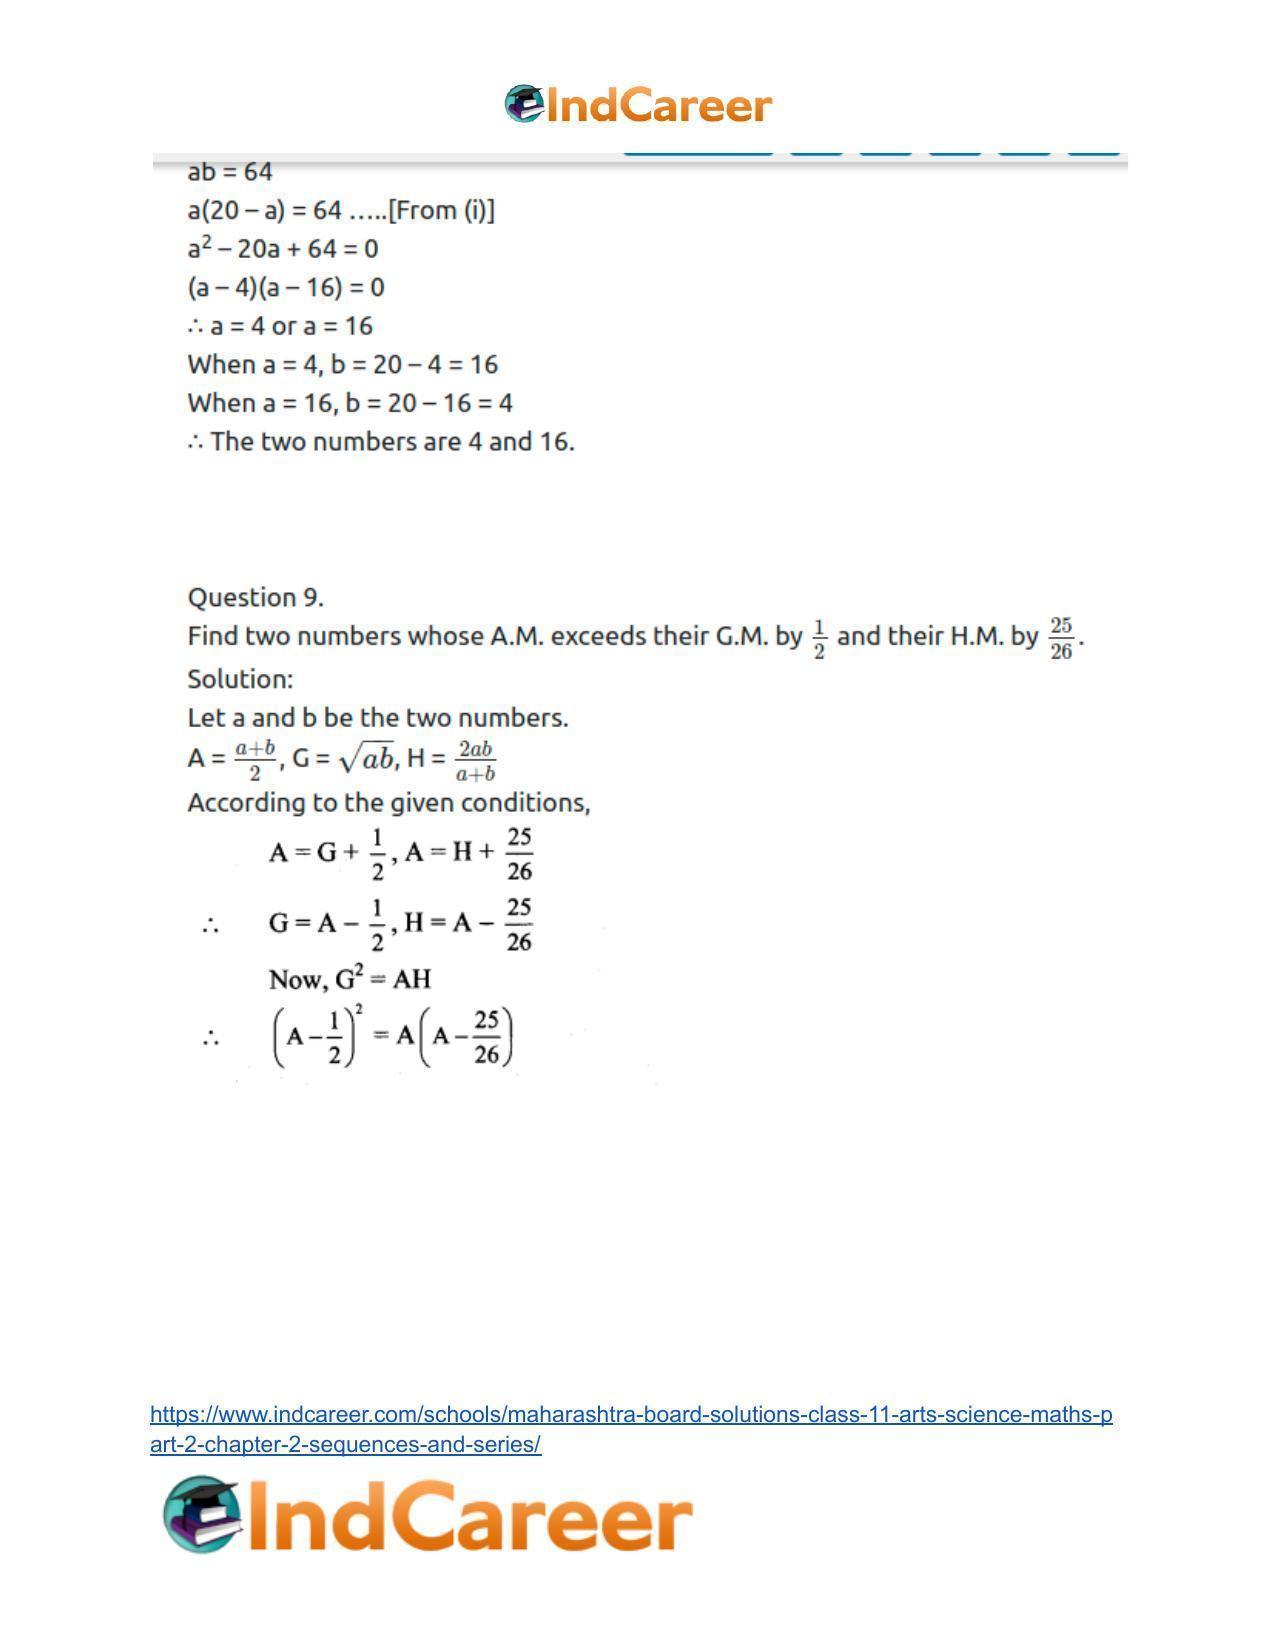 Maharashtra Board Solutions Class 11-Arts & Science Maths (Part 2): Chapter 2- Sequences and Series - Page 58